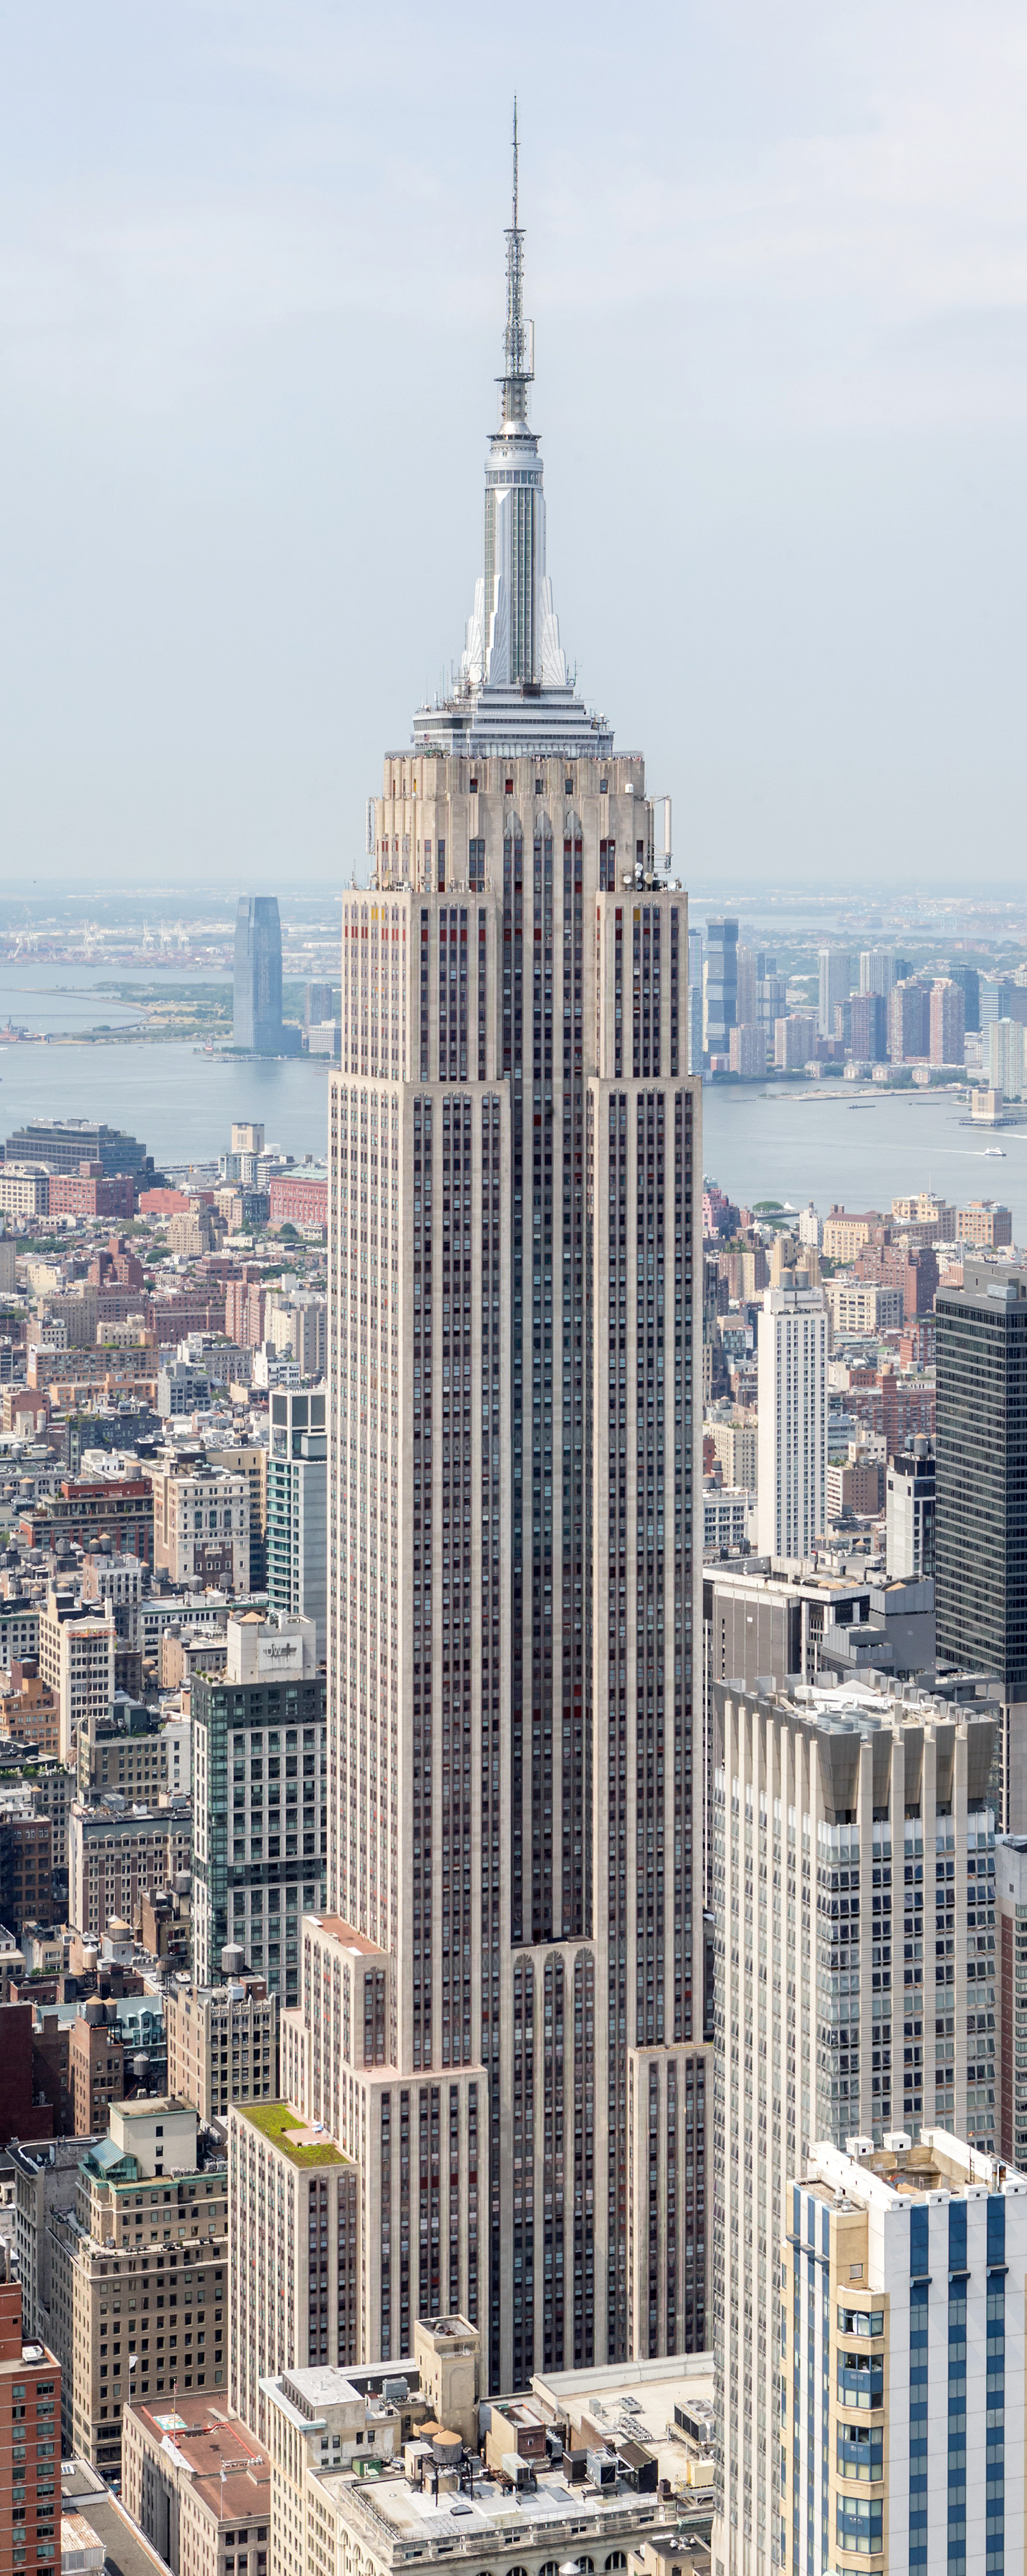 Empire State Building, New York City - View from One Vanderbilt. © Mathias Beinling